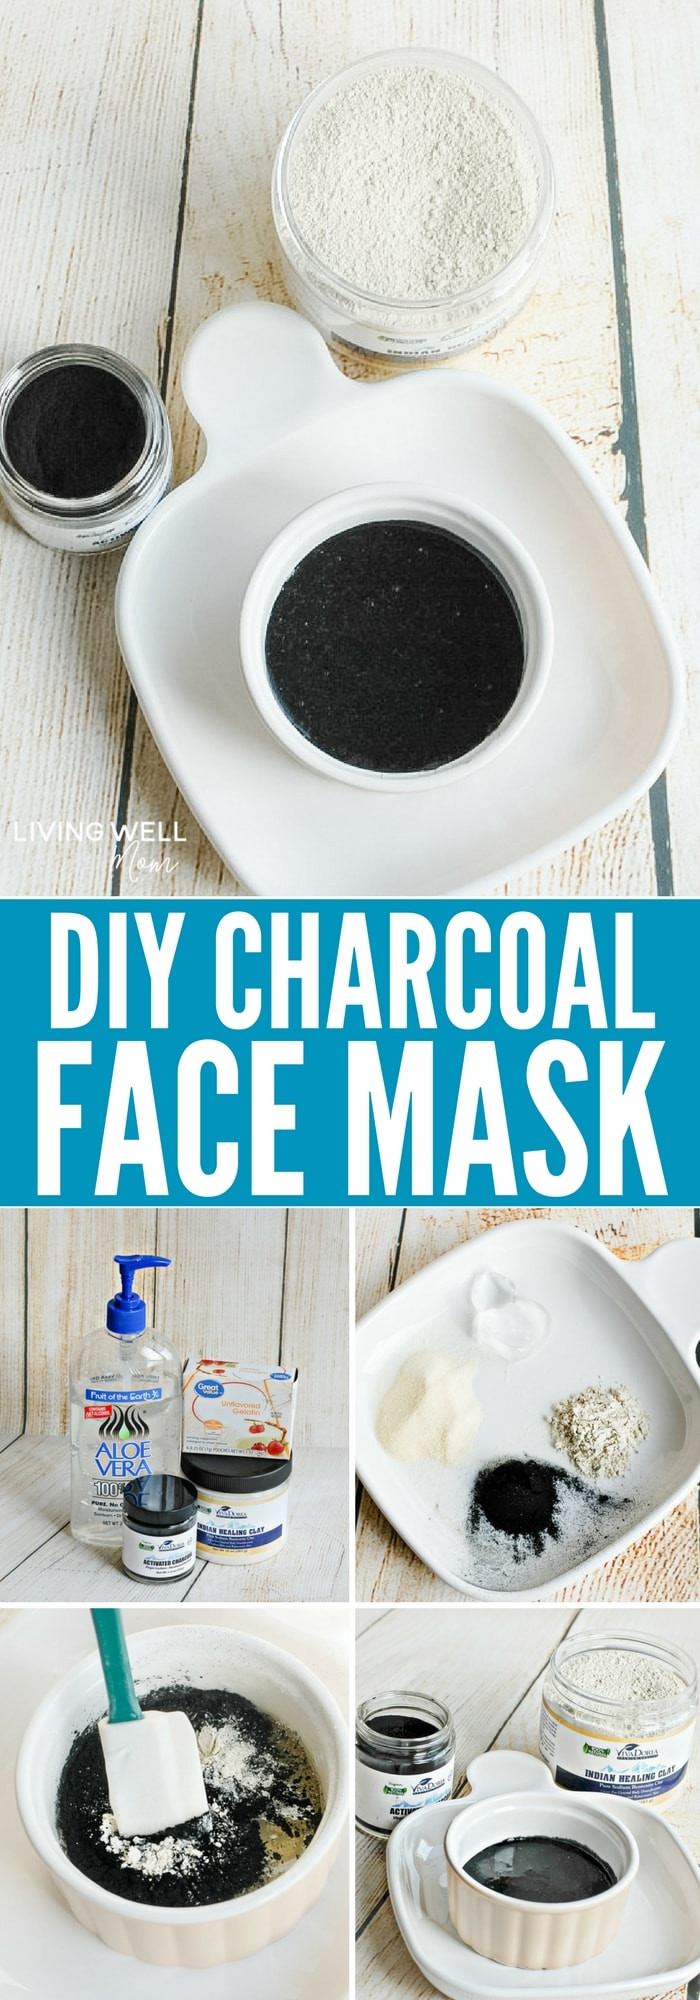 Charcoal Mask DIY
 DIY Charcoal Face Mask Recipe Living Well Mom